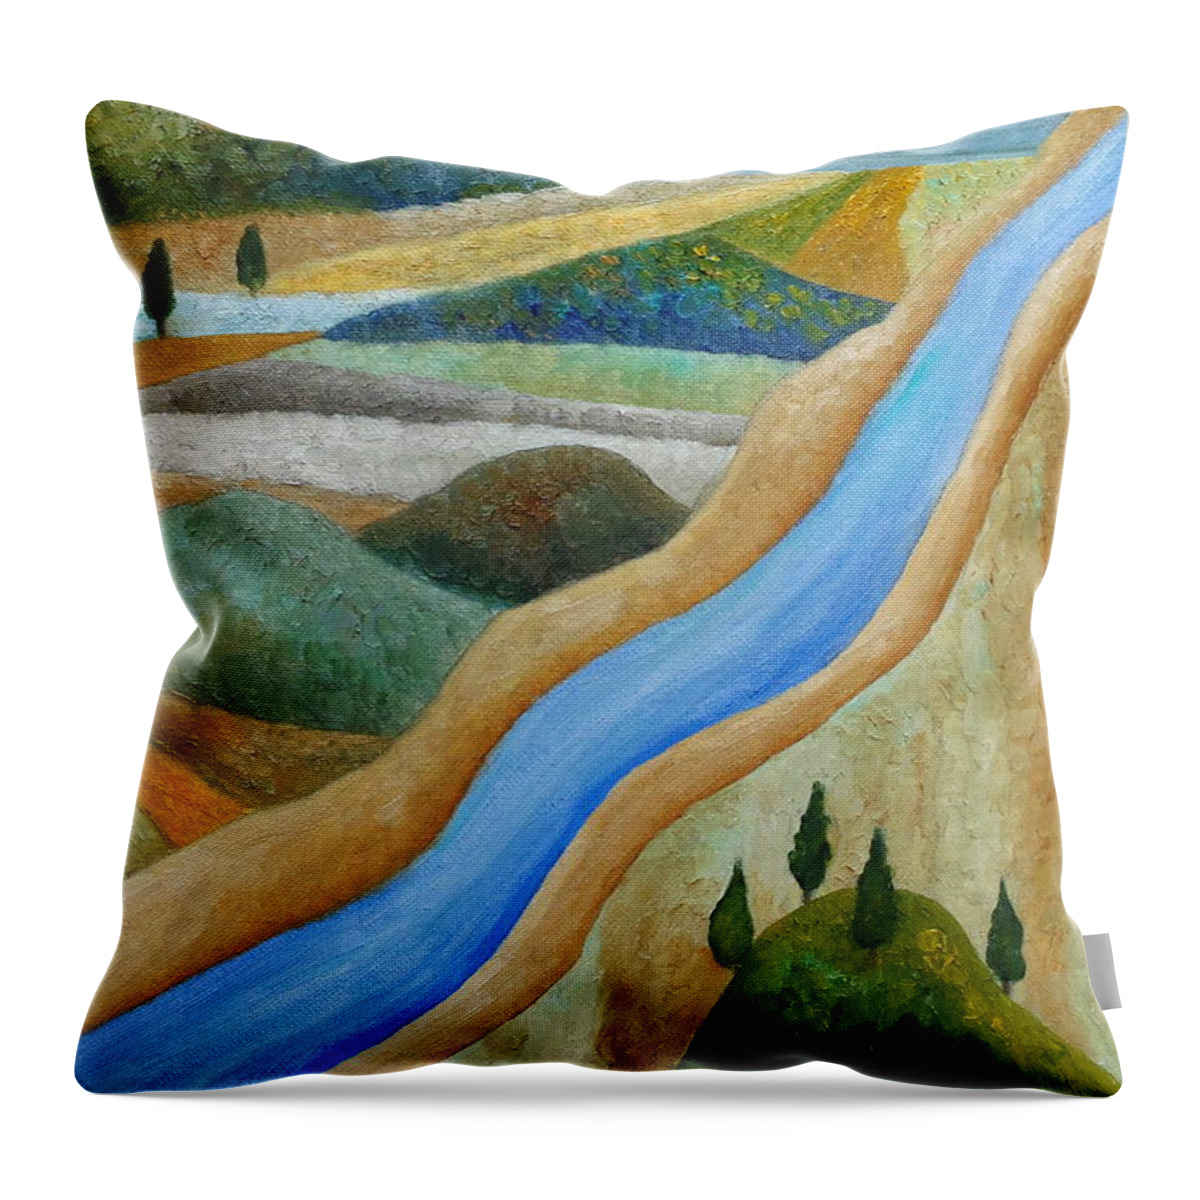 Seascape Throw Pillow featuring the painting Outside The Current by Angeles M Pomata